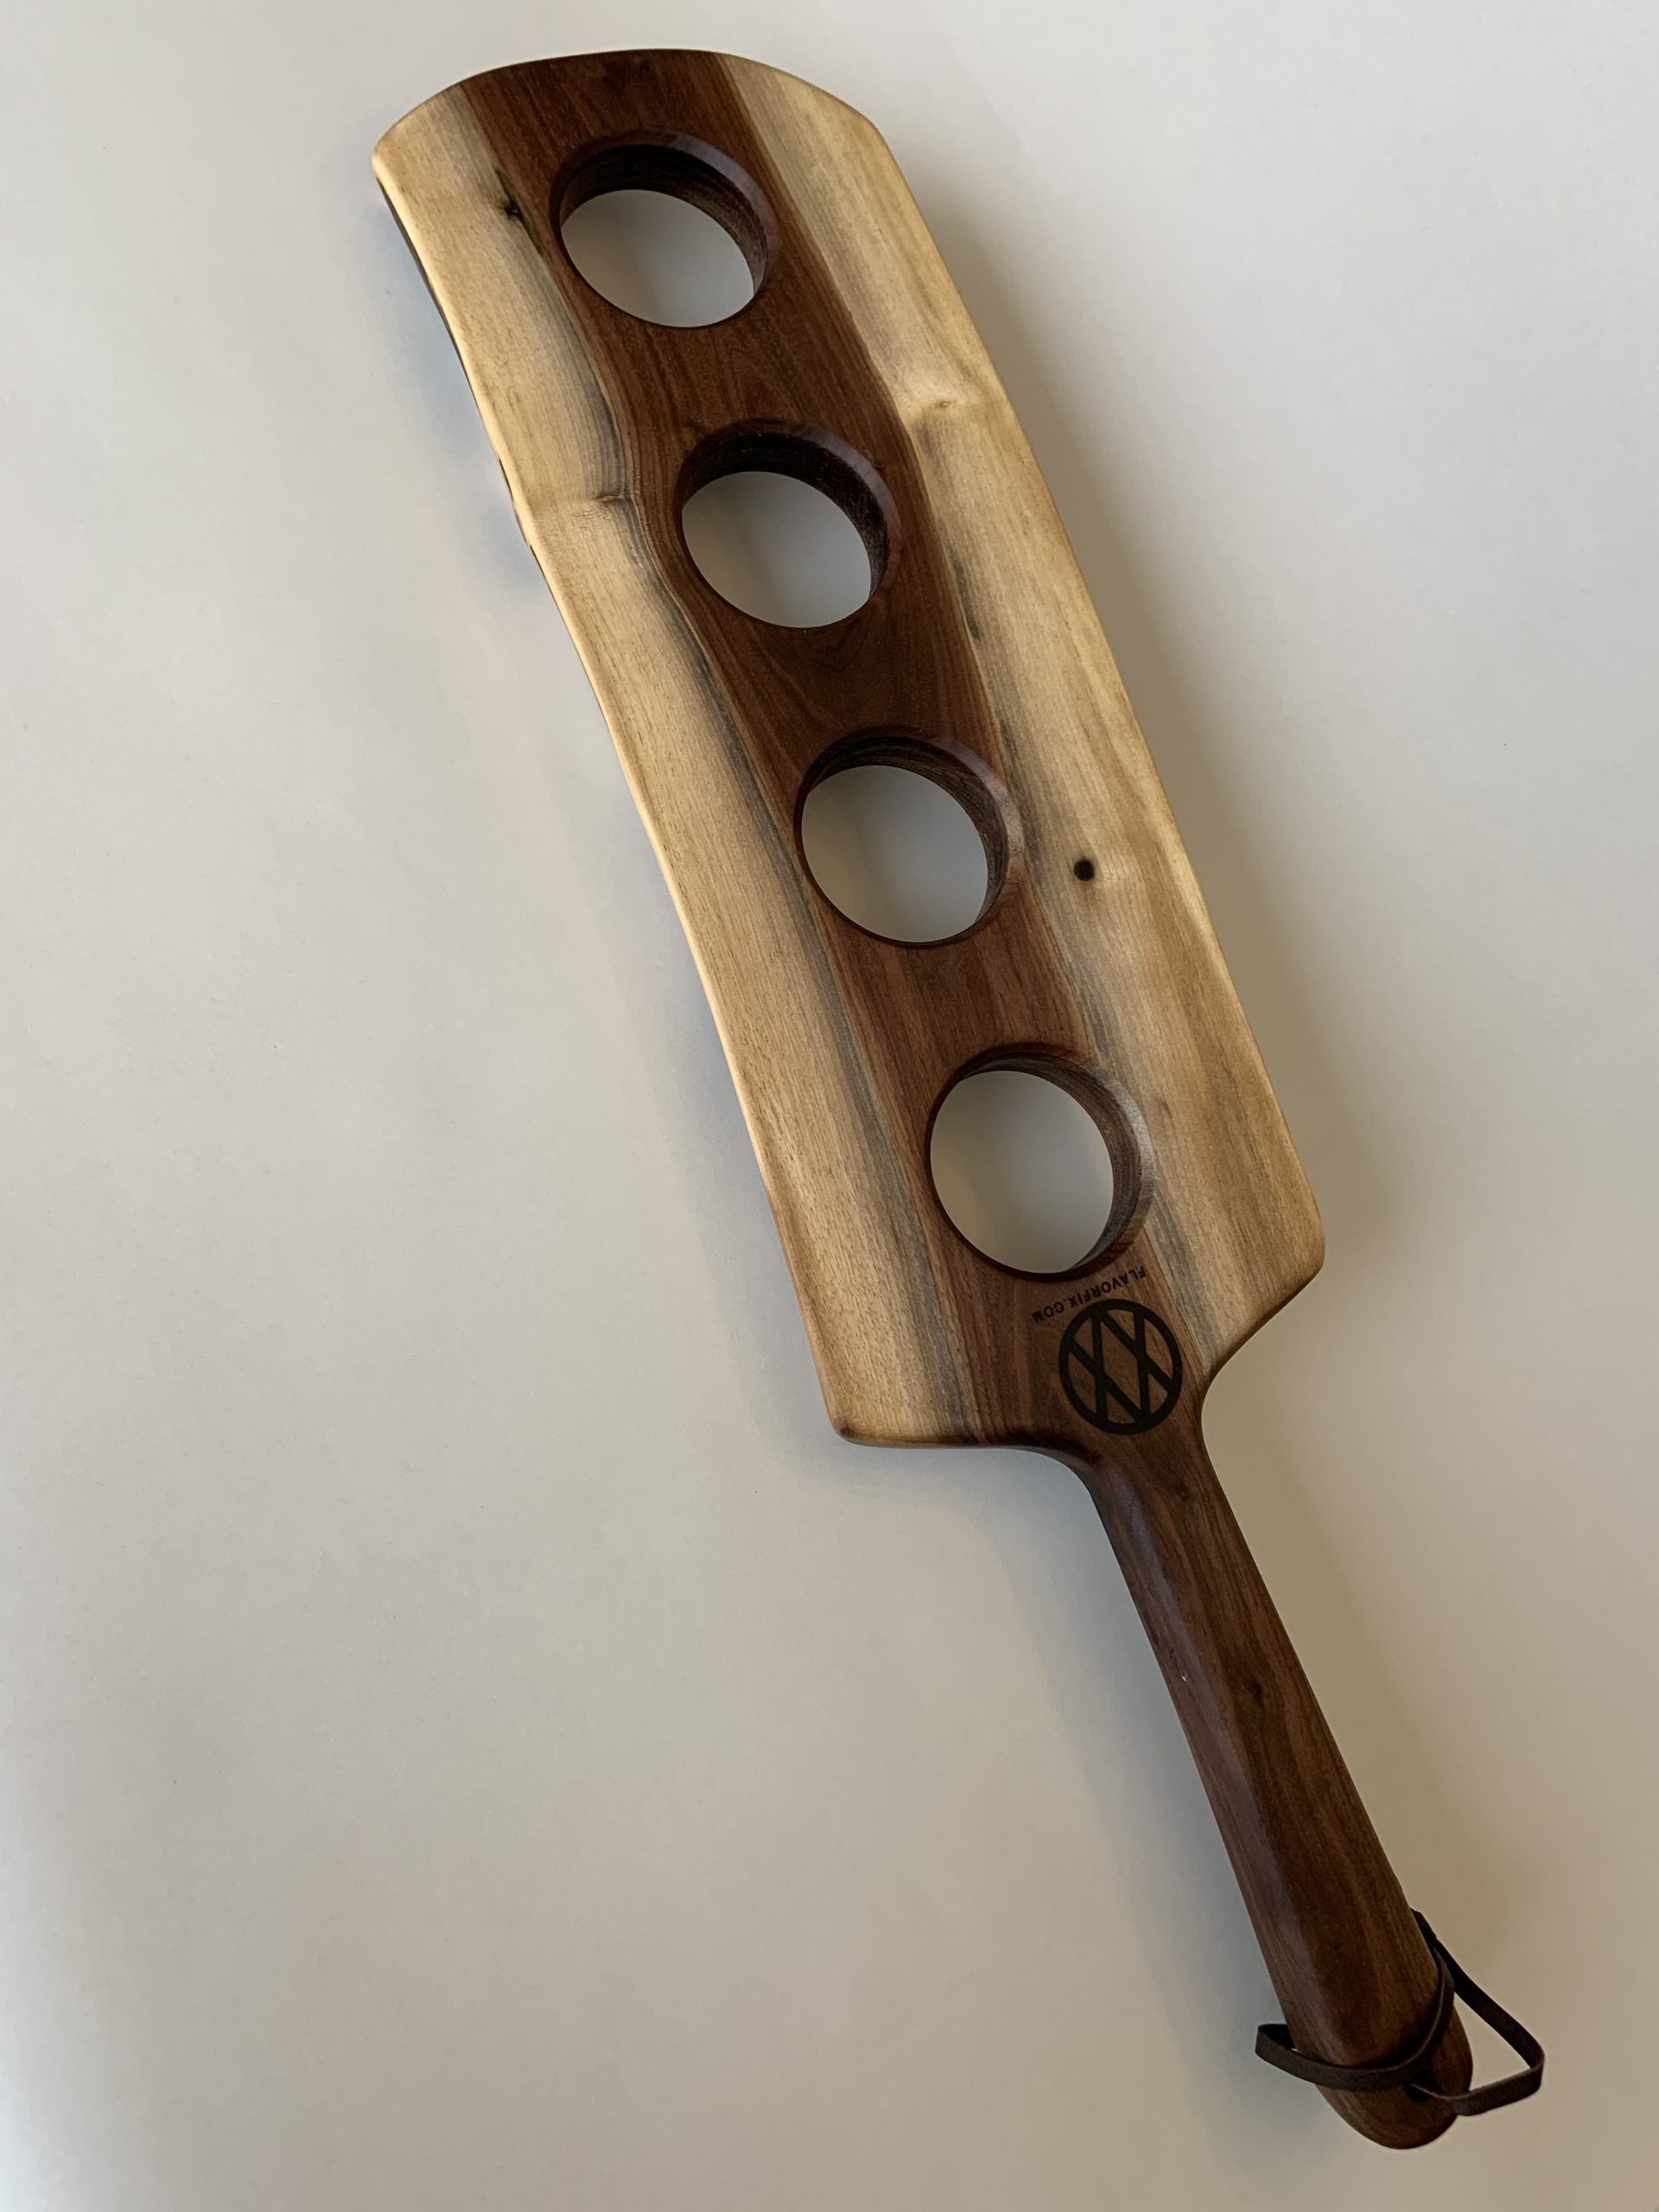 Wooden Serving Paddle